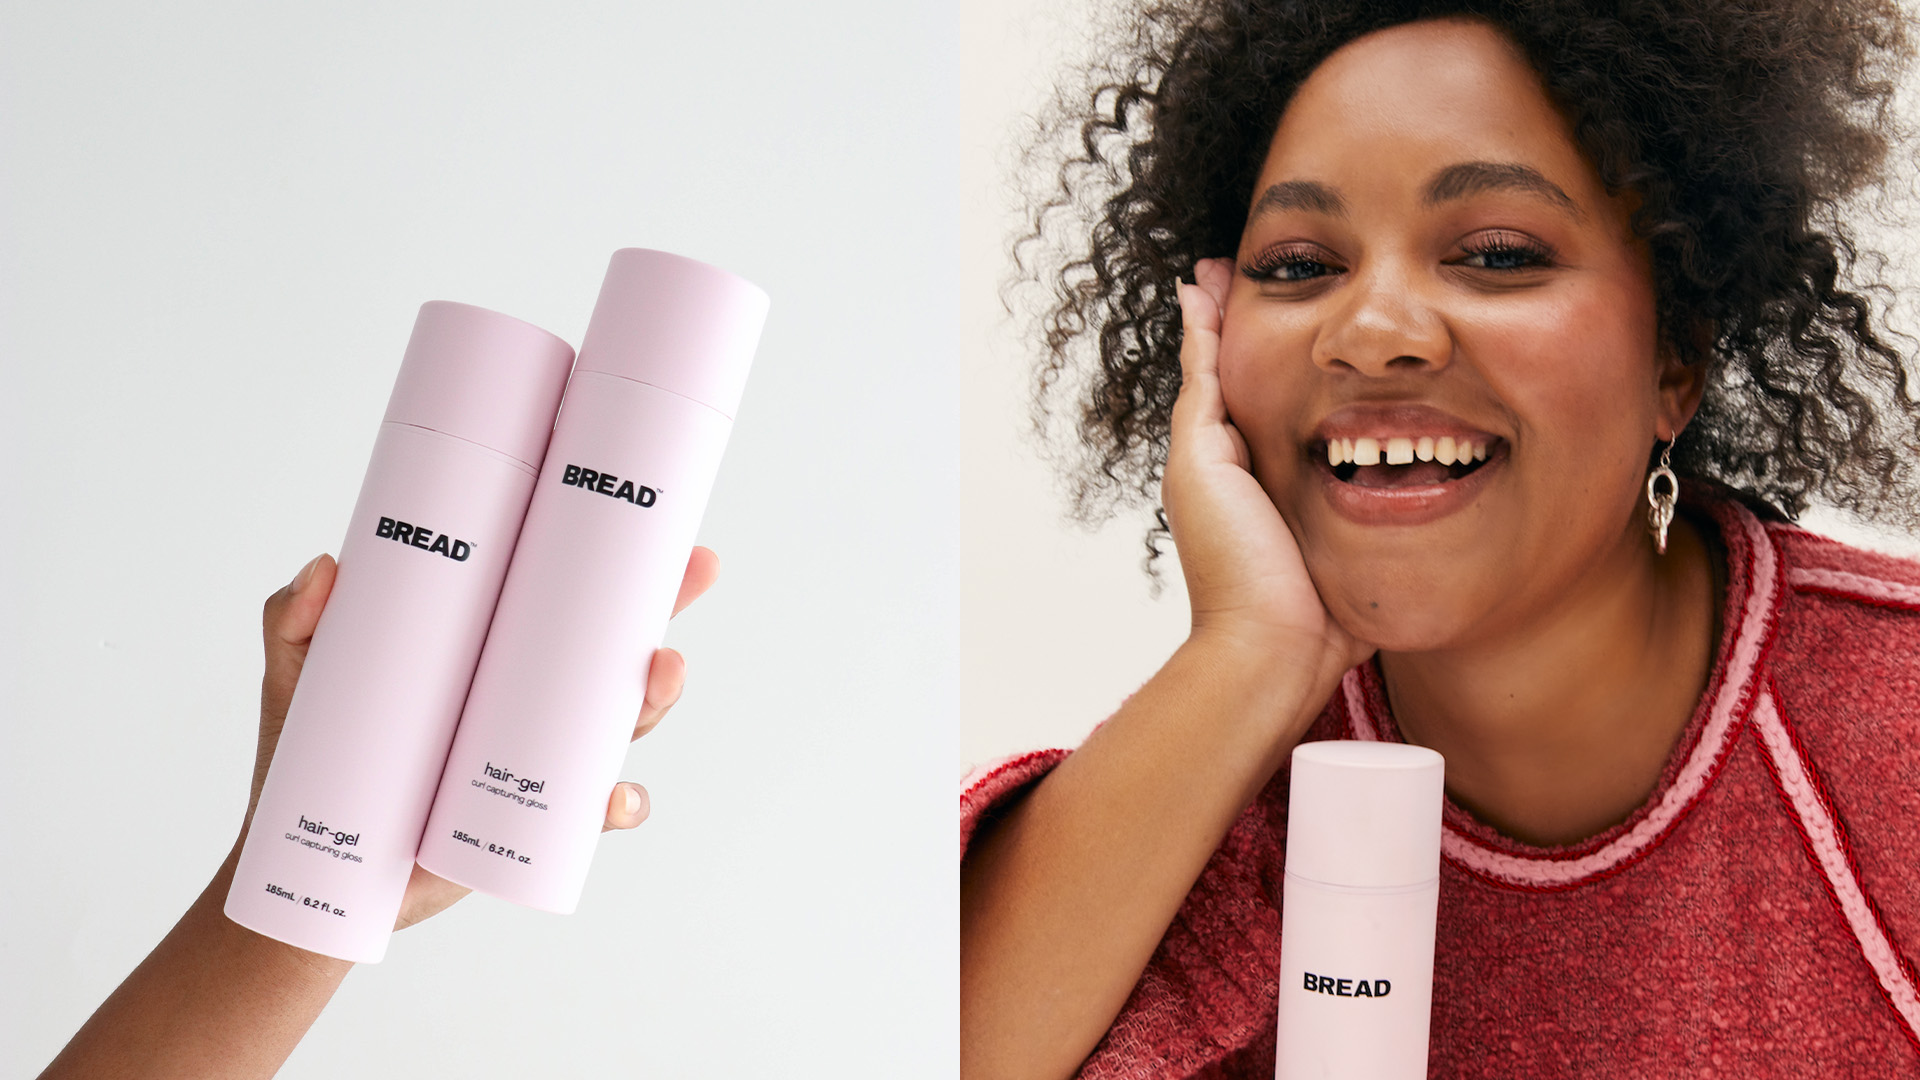 Following The Raise Of A Multi-Million Dollar Seed Funding Round Led By Fearless Fund, BREAD Shares Plans To Take Over The Haircare Industry